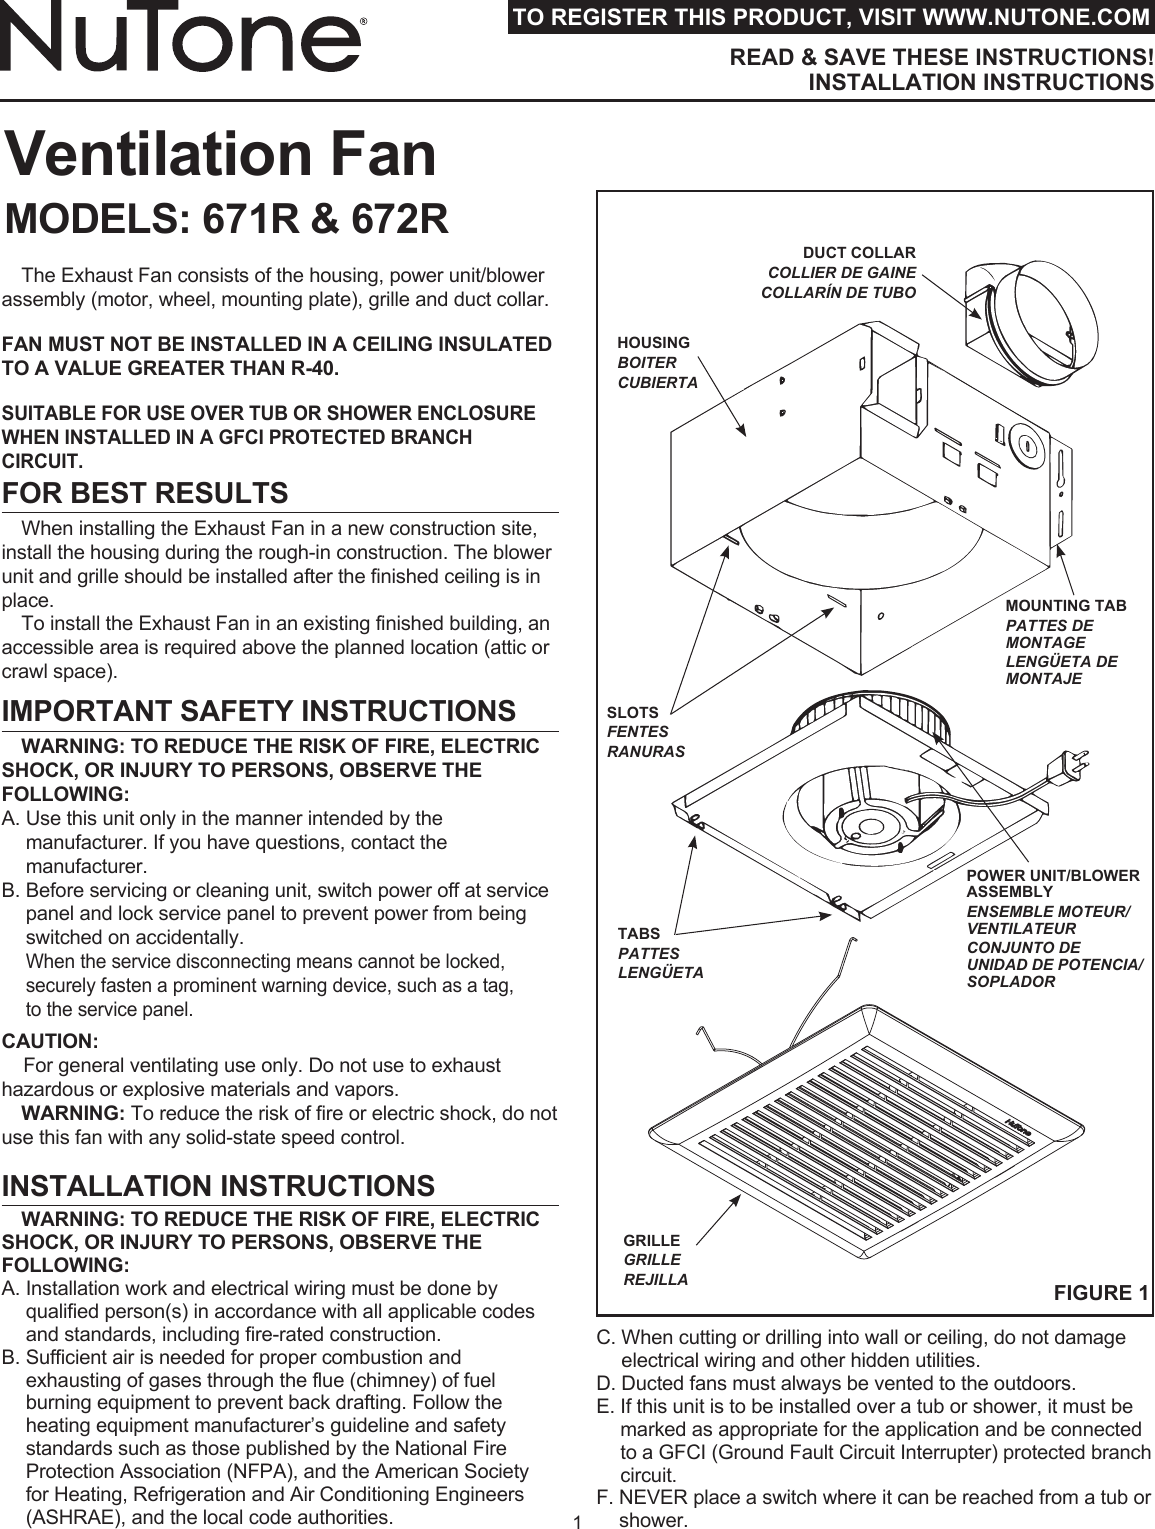 Page 1 of 6 - Broan 671 User Manual  To The Ea1ee905-99fb-4ede-8f43-1e7908010c00